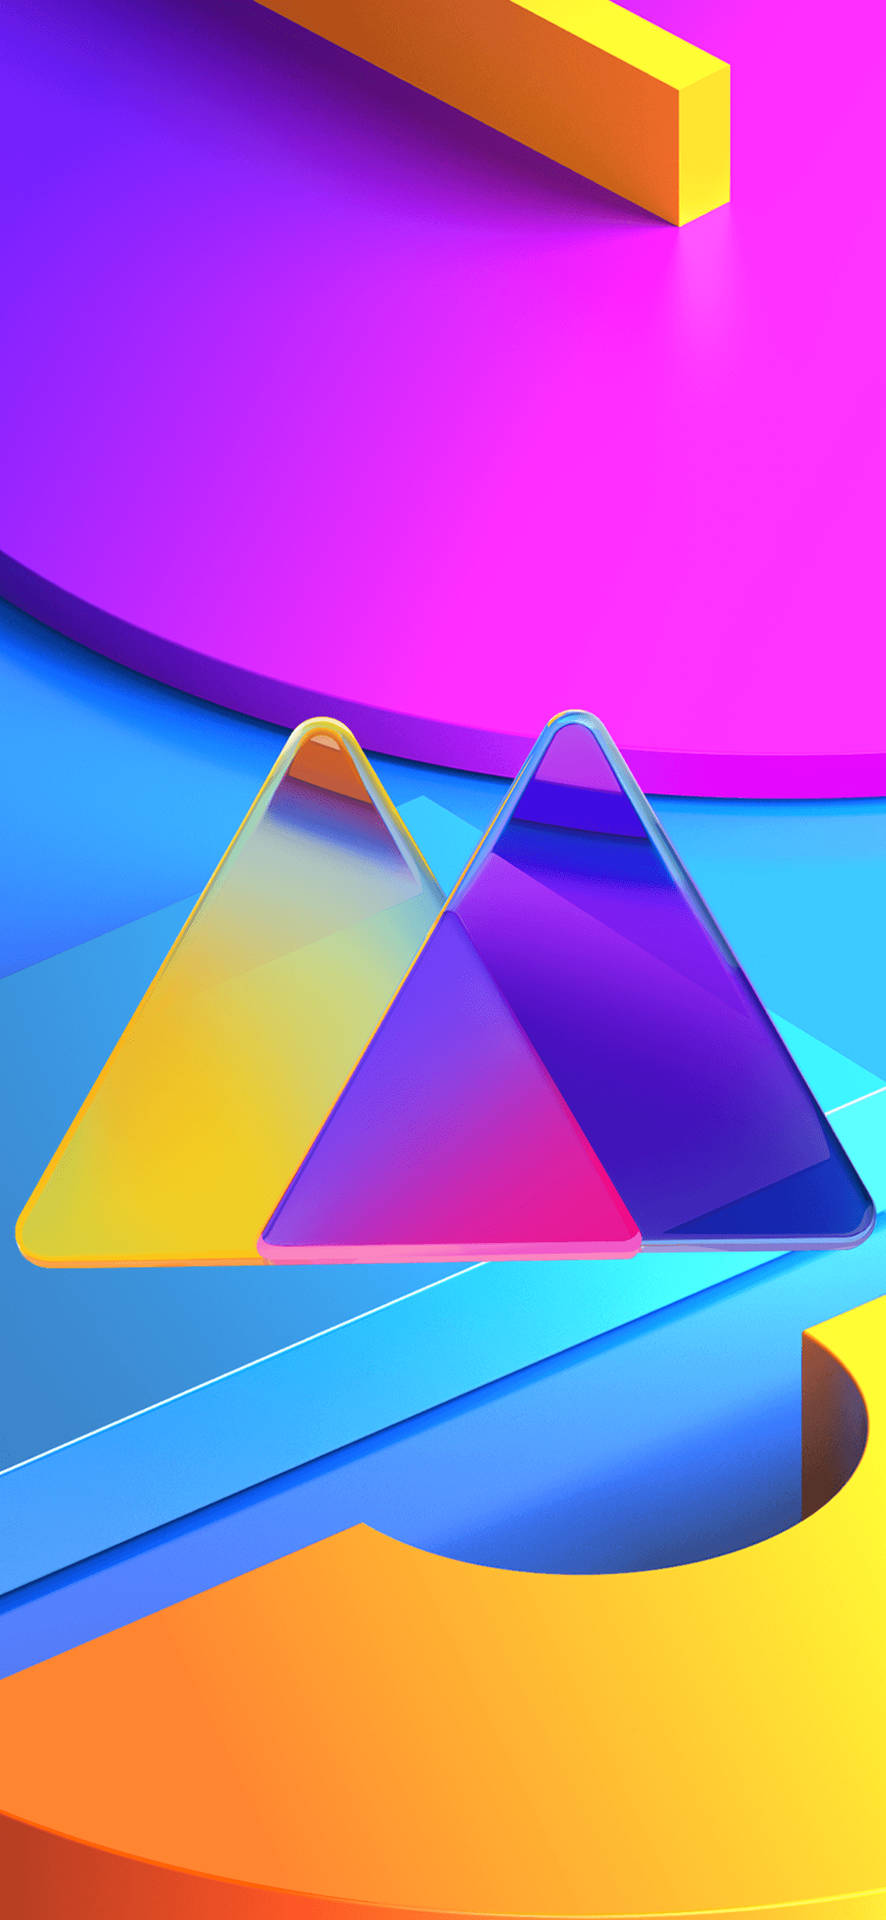 Samsung Mobile Abstract Shapes Wallpaper